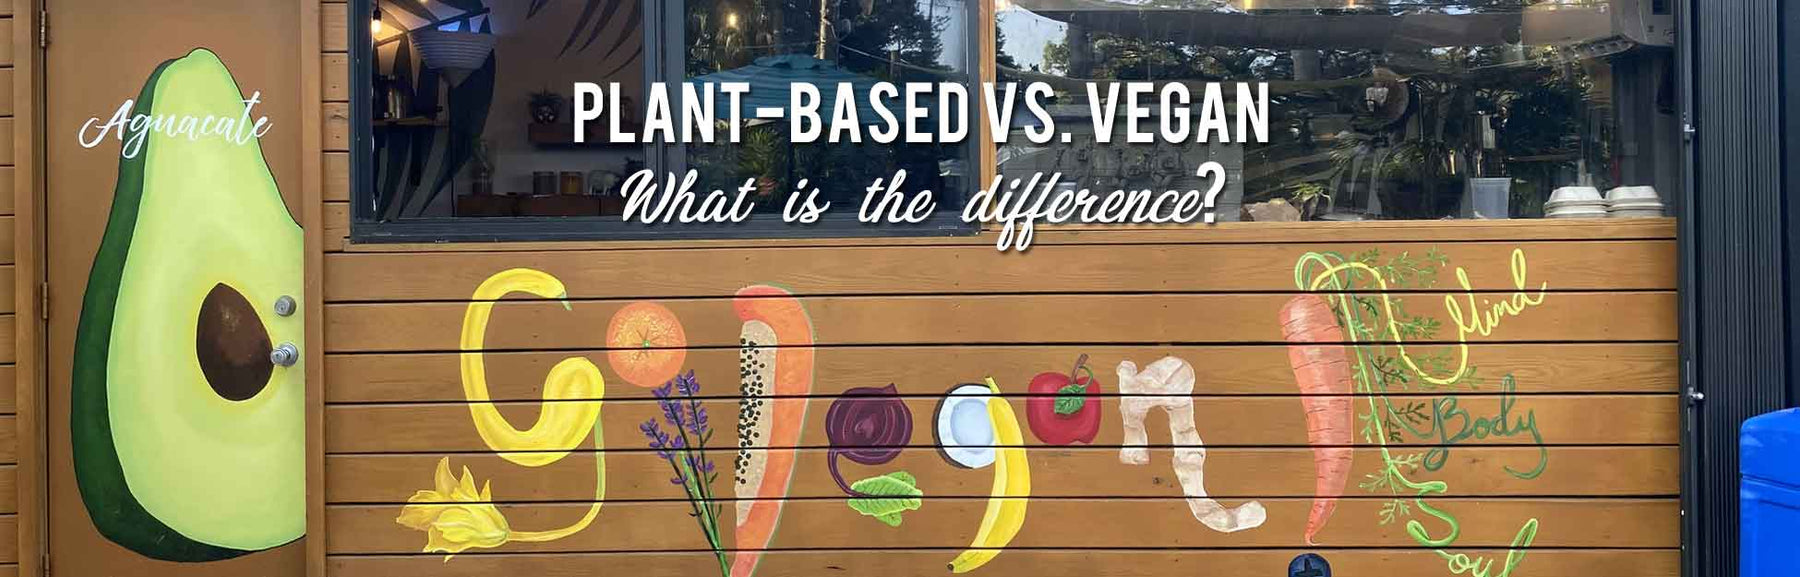 Plant-based vs. Vegan - What is the difference